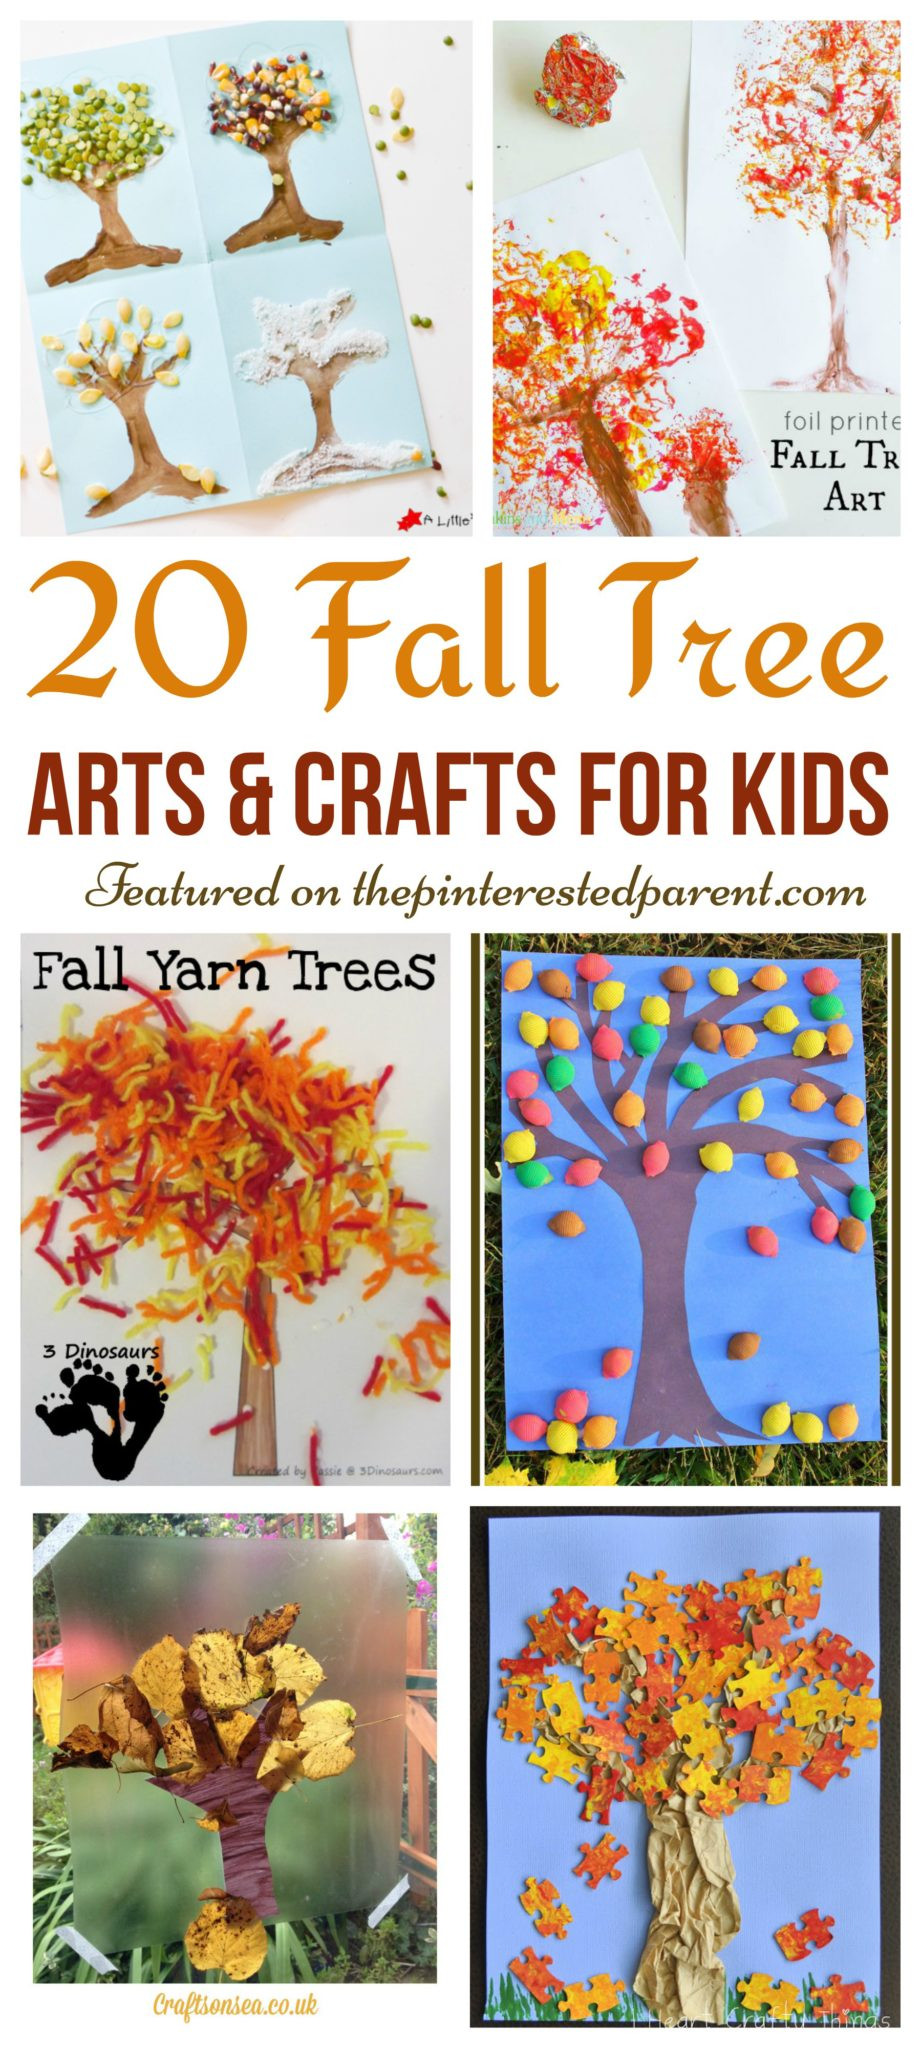 Craft Activities For Preschoolers
 20 Fall Tree Arts & Crafts Ideas For Kids – The